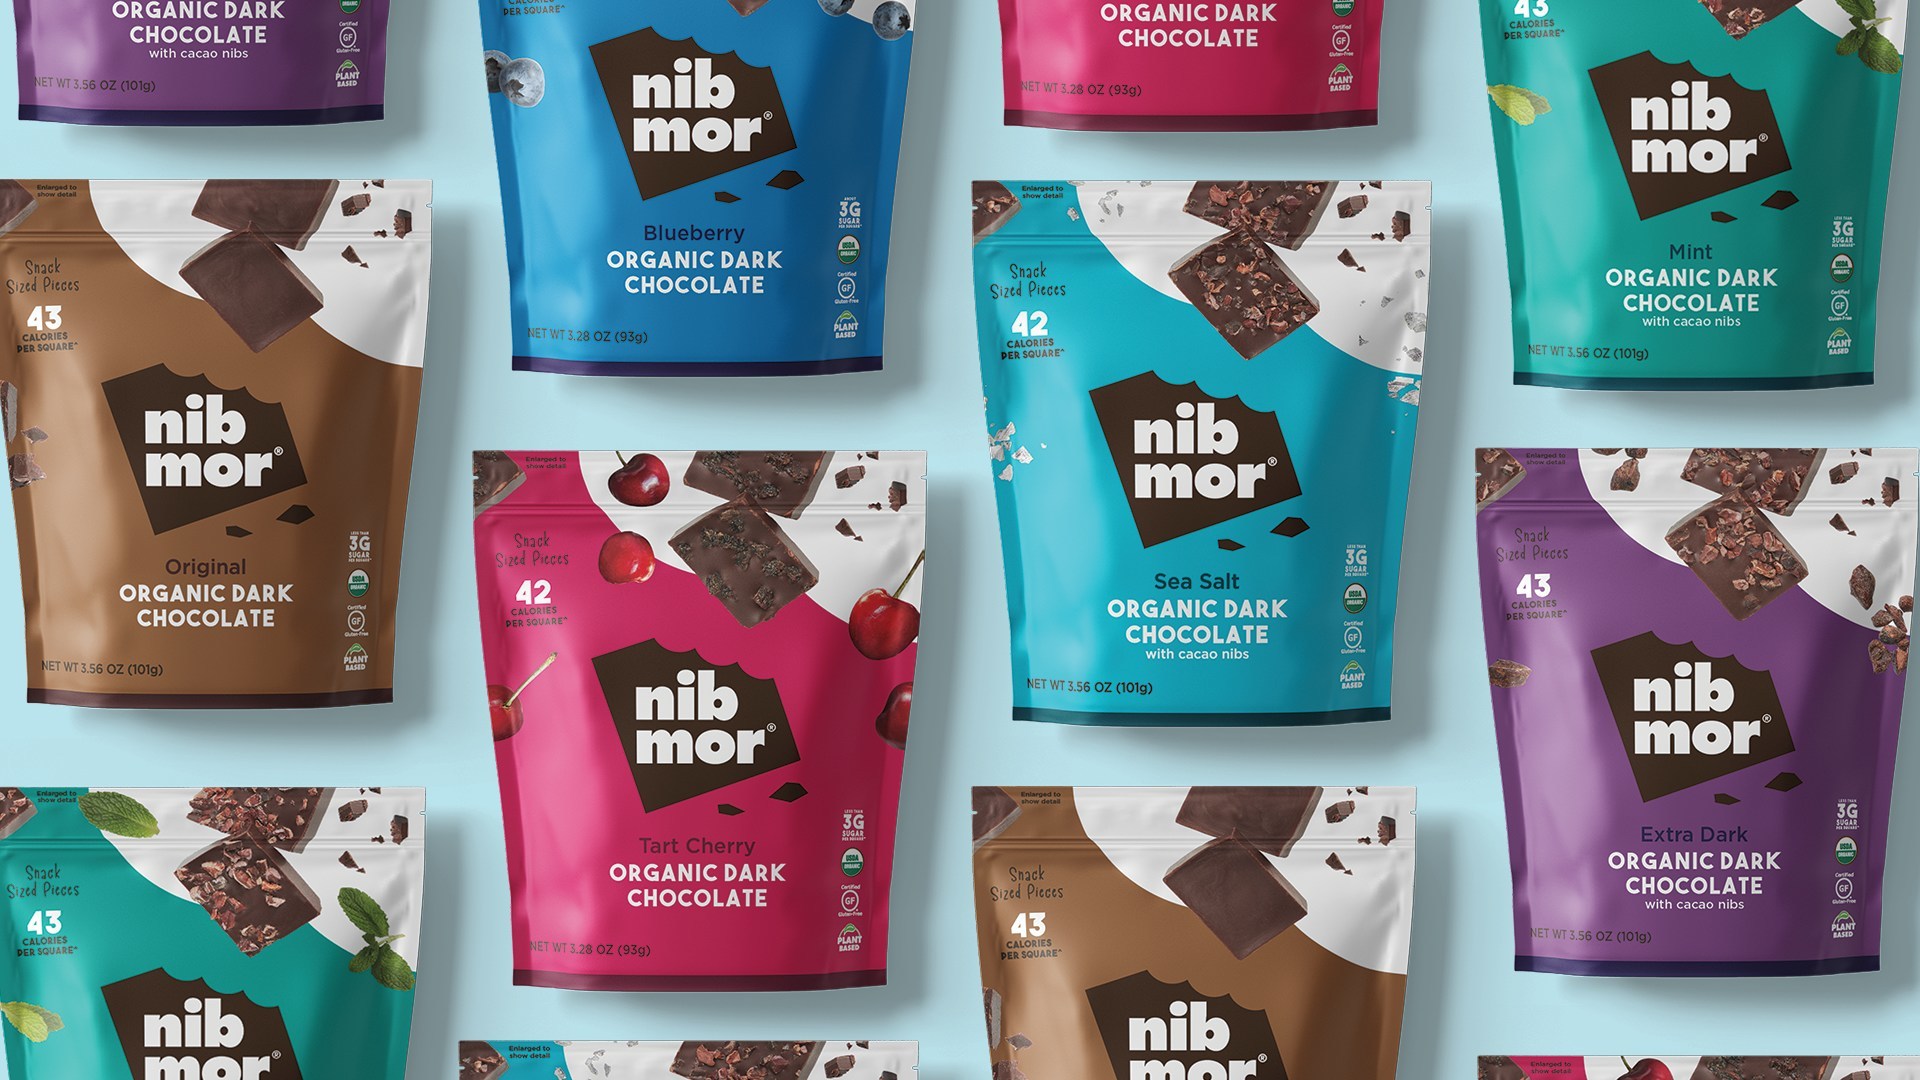 nib mor, known for their certifiably indulgent organic dark chocolate, announced a brand new logo and upgraded packaging.